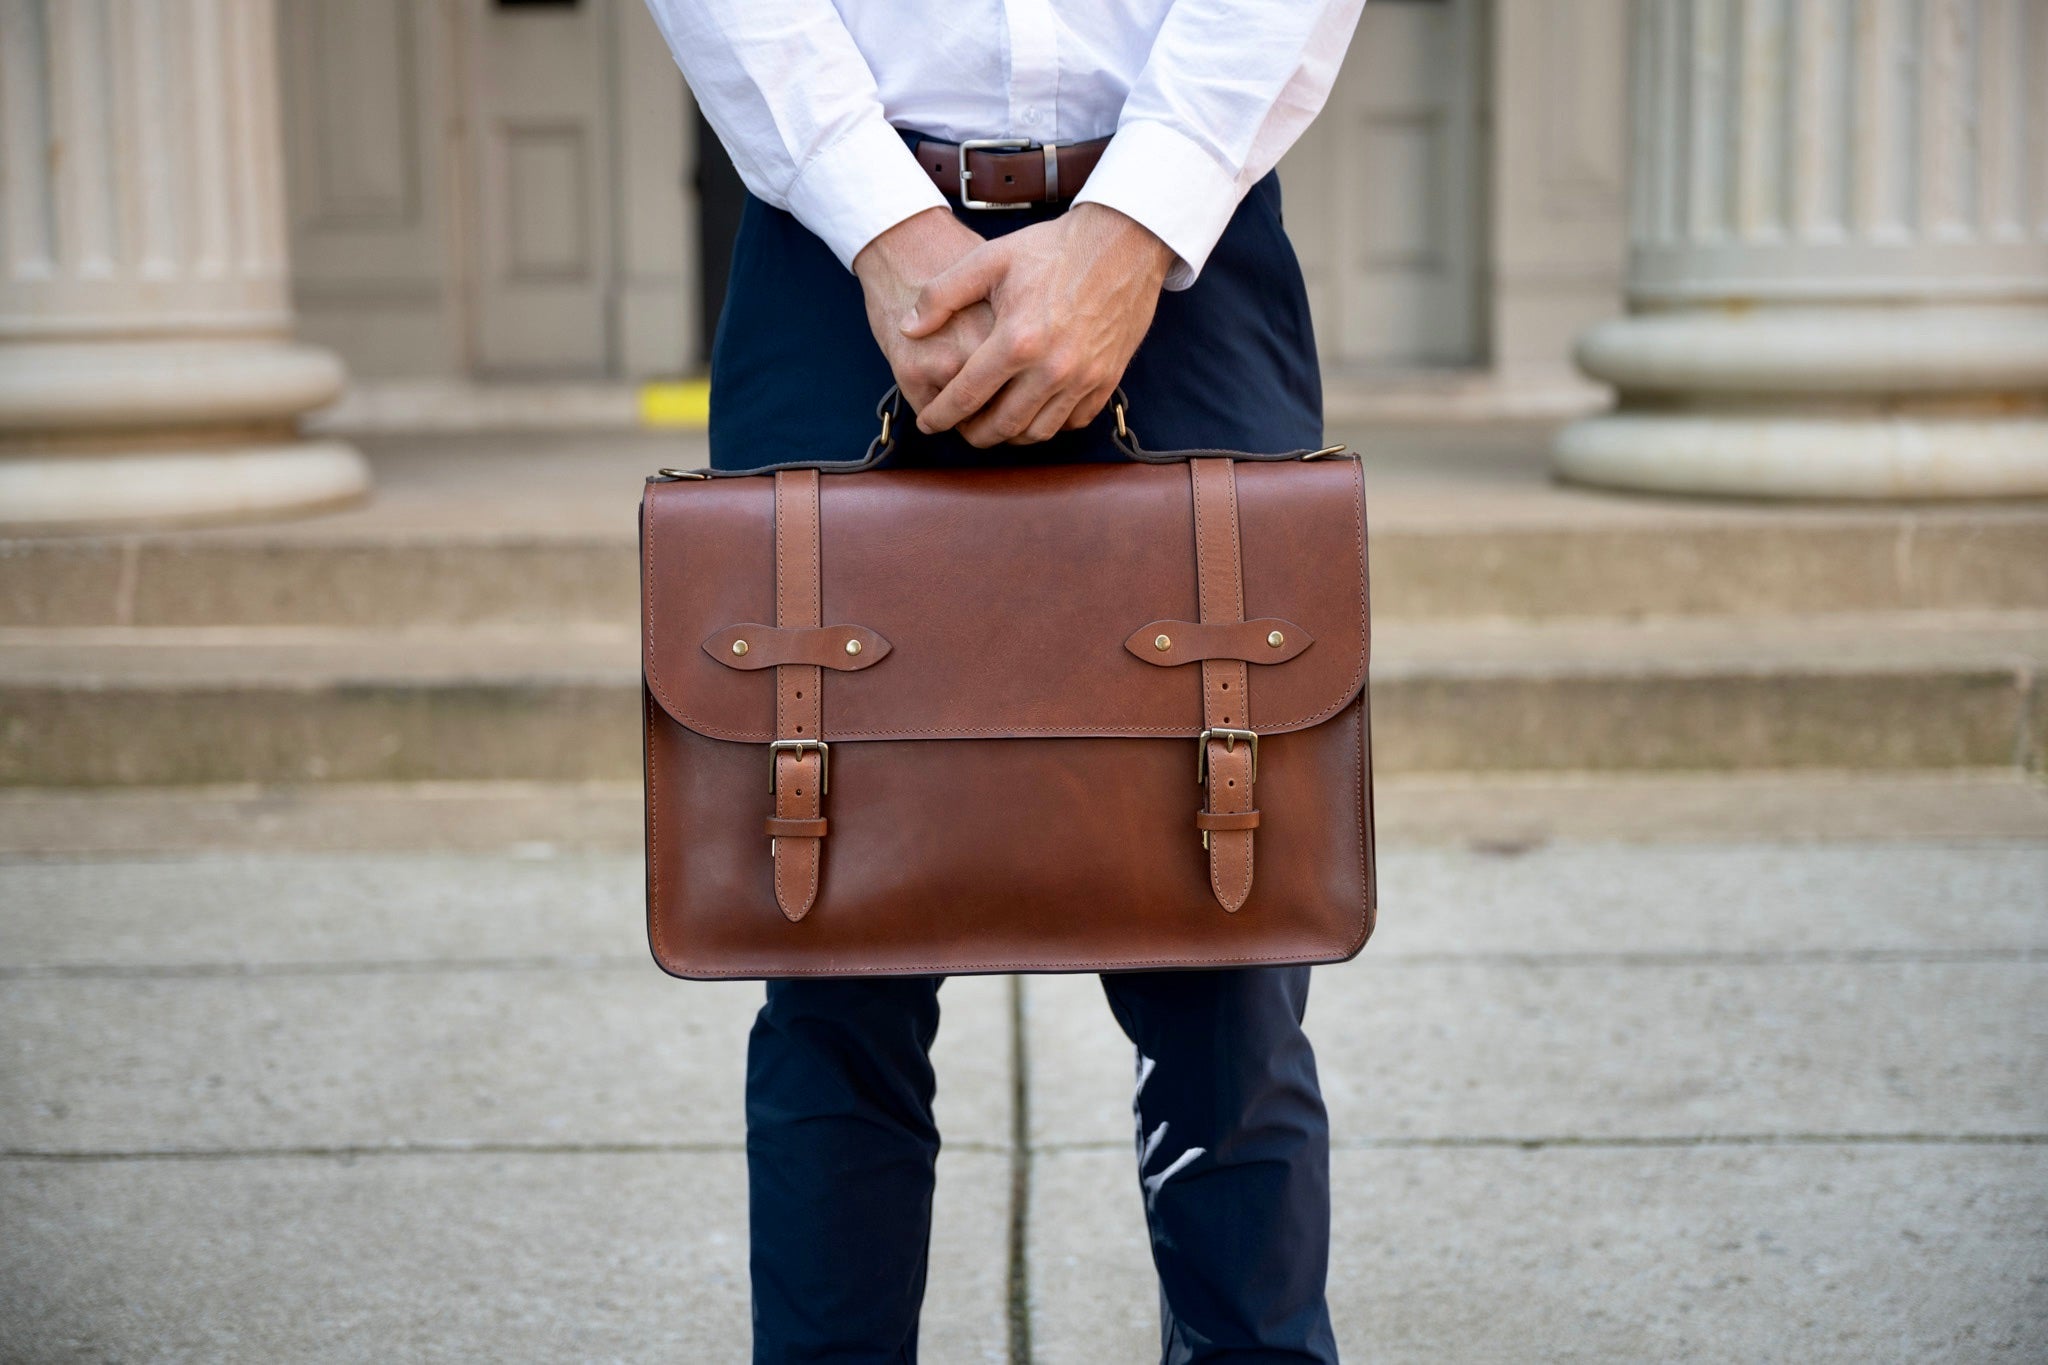 Attache Case vs. Briefcase - What's The Difference? | Buffalo Jackson